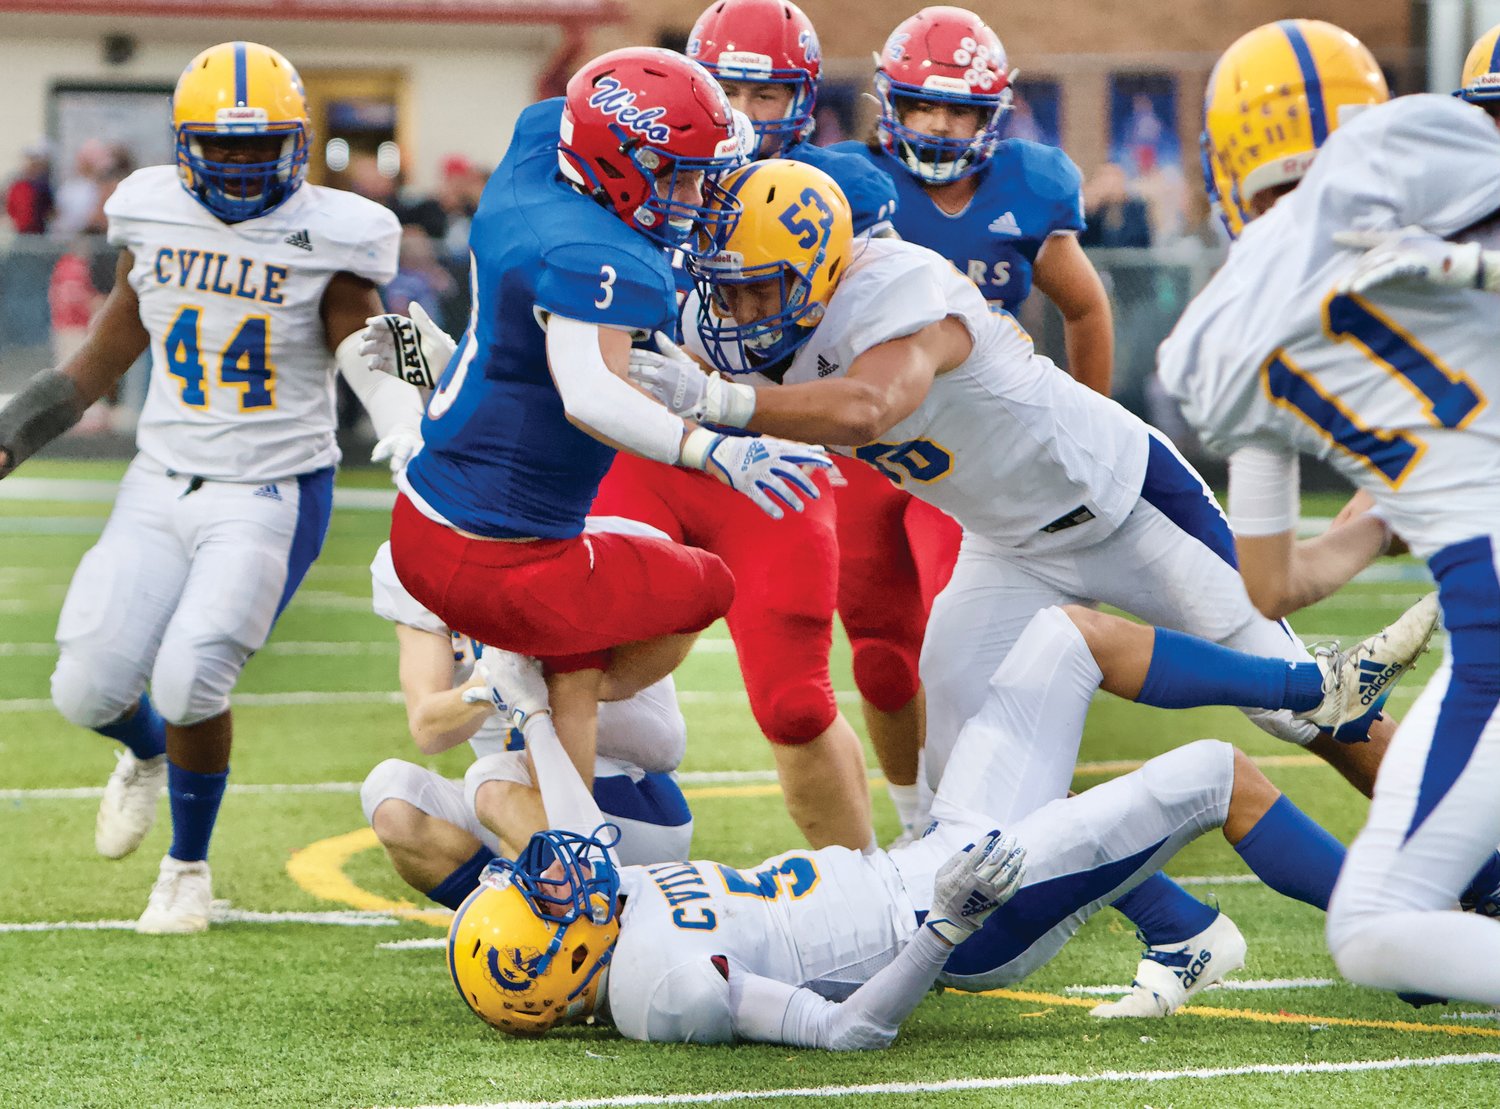 Crawfordsville defense stops Western Boone in the backfield.